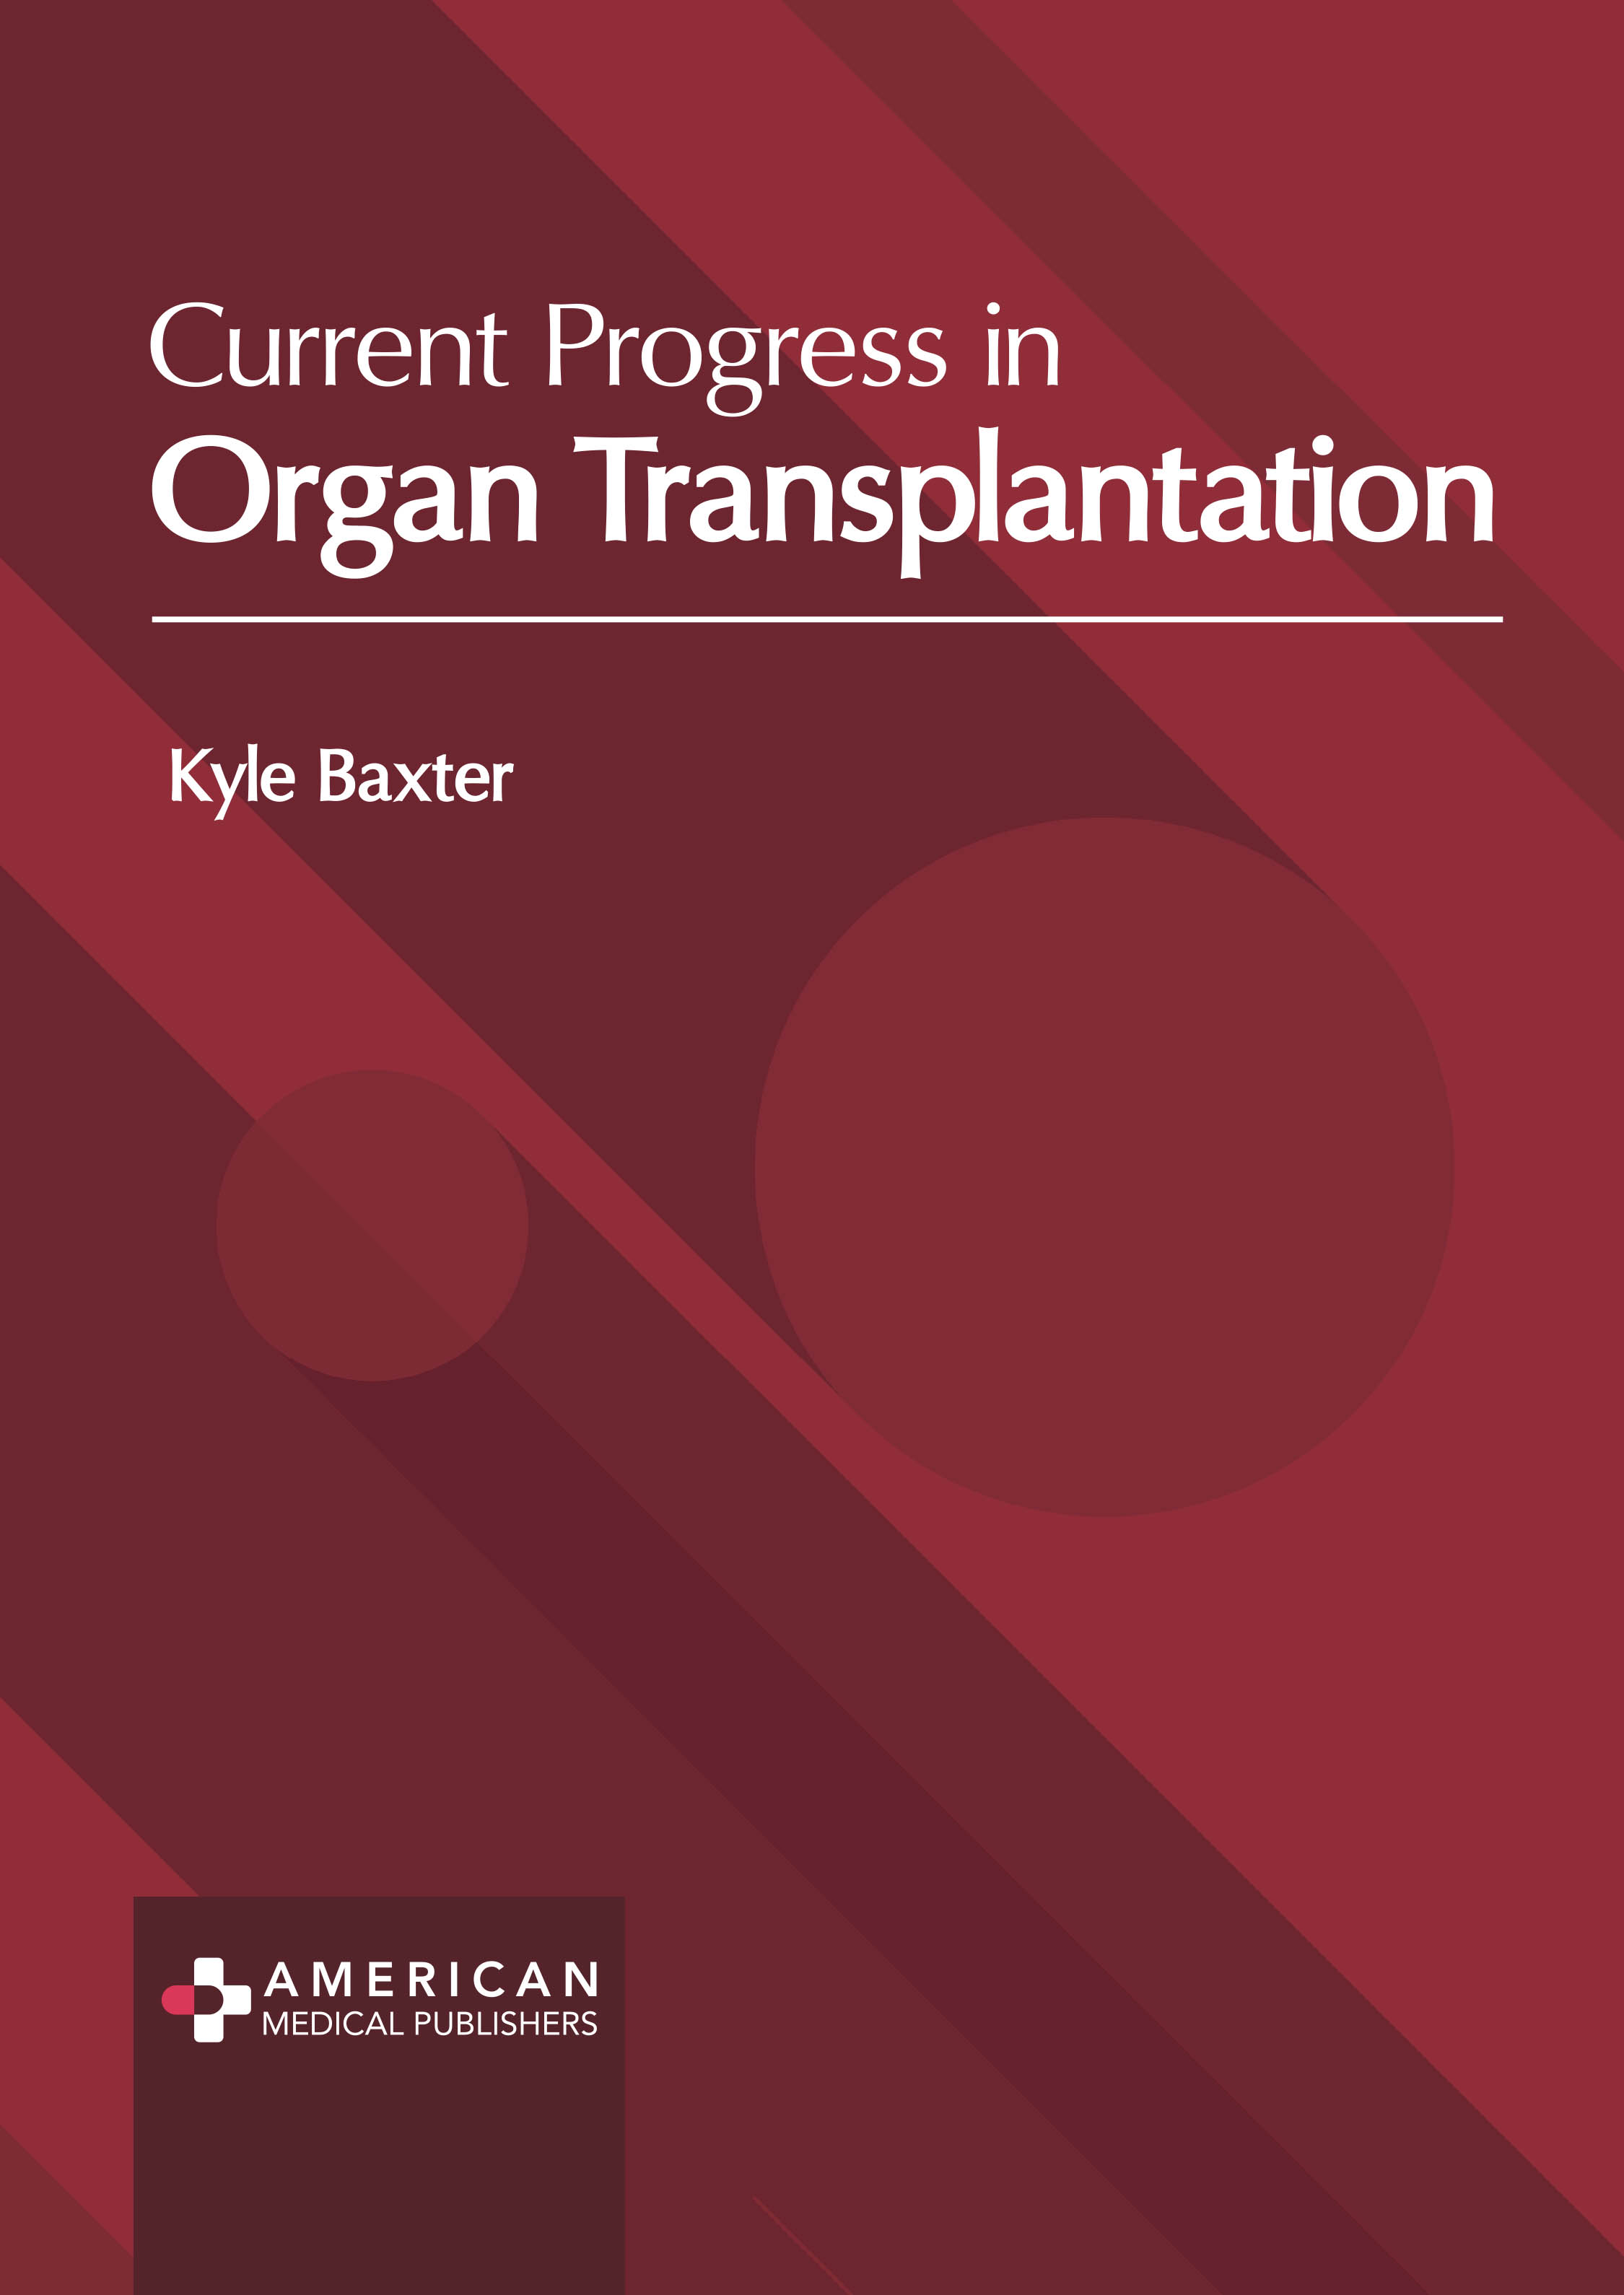 

exclusive-publishers/american-medical-publishers/current-progress-in-organ-transplantation-9781639274864